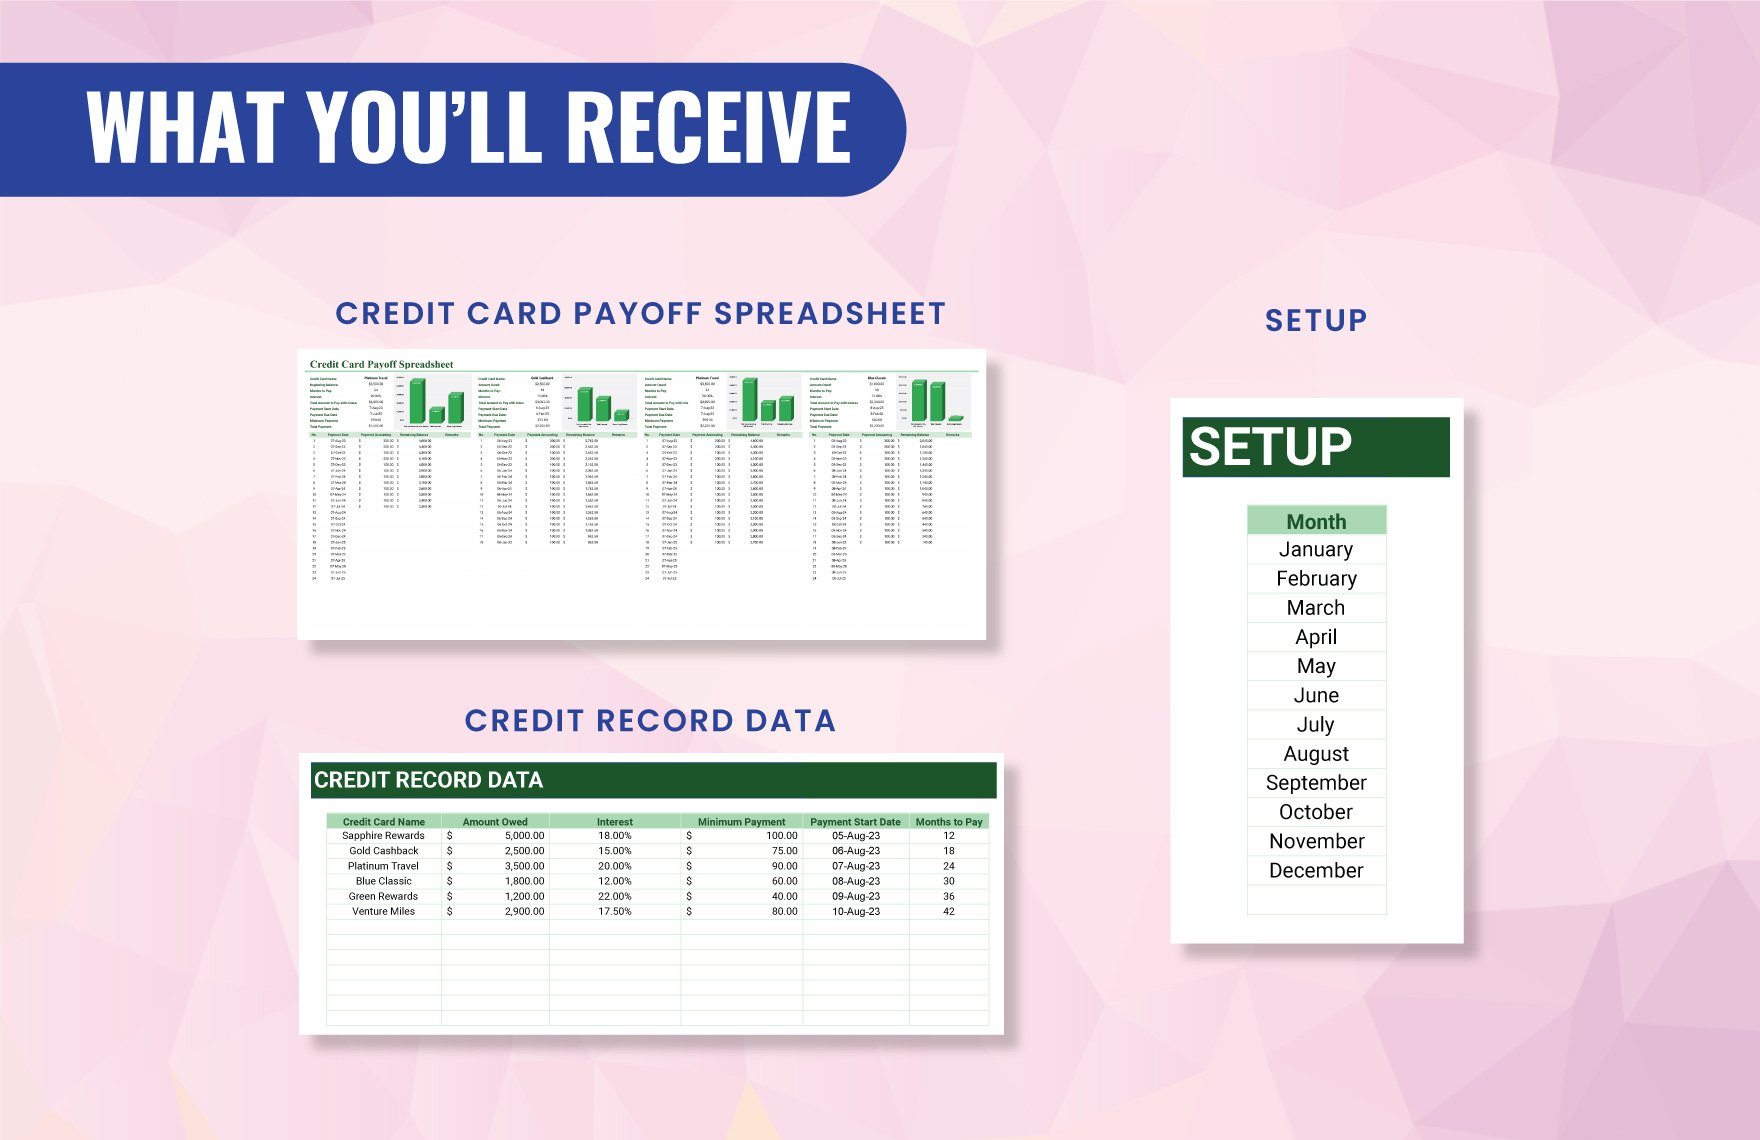 Credit Card Payoff Spreadsheet Template